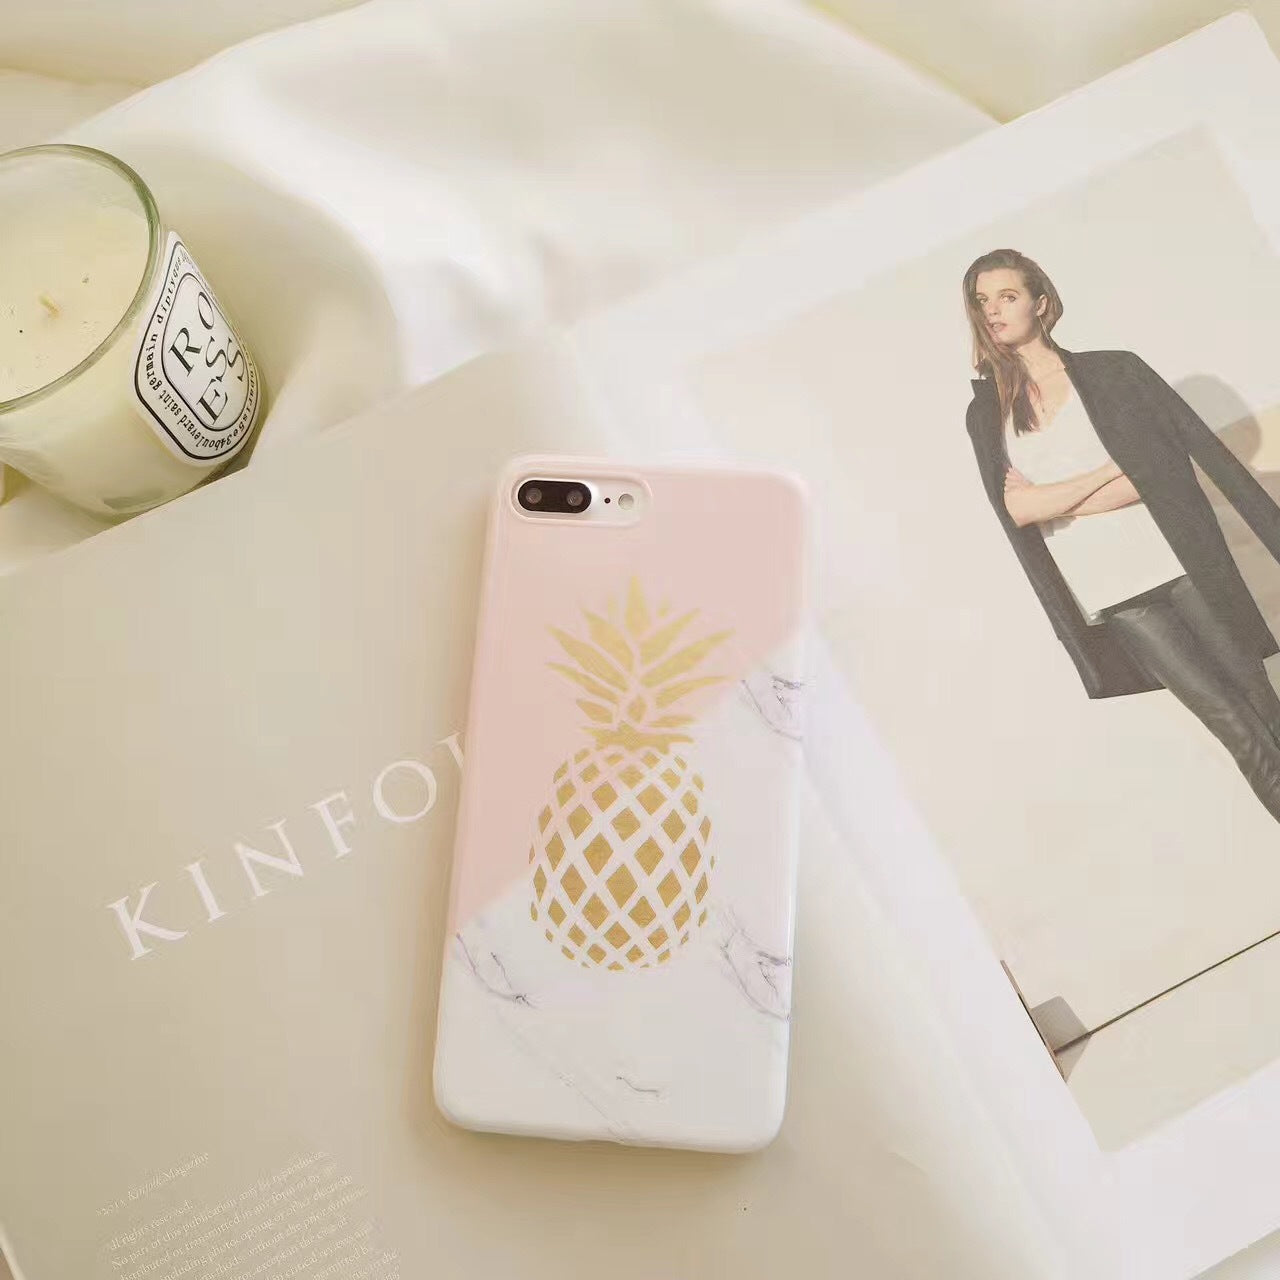 Stitching pineapple marble phone case